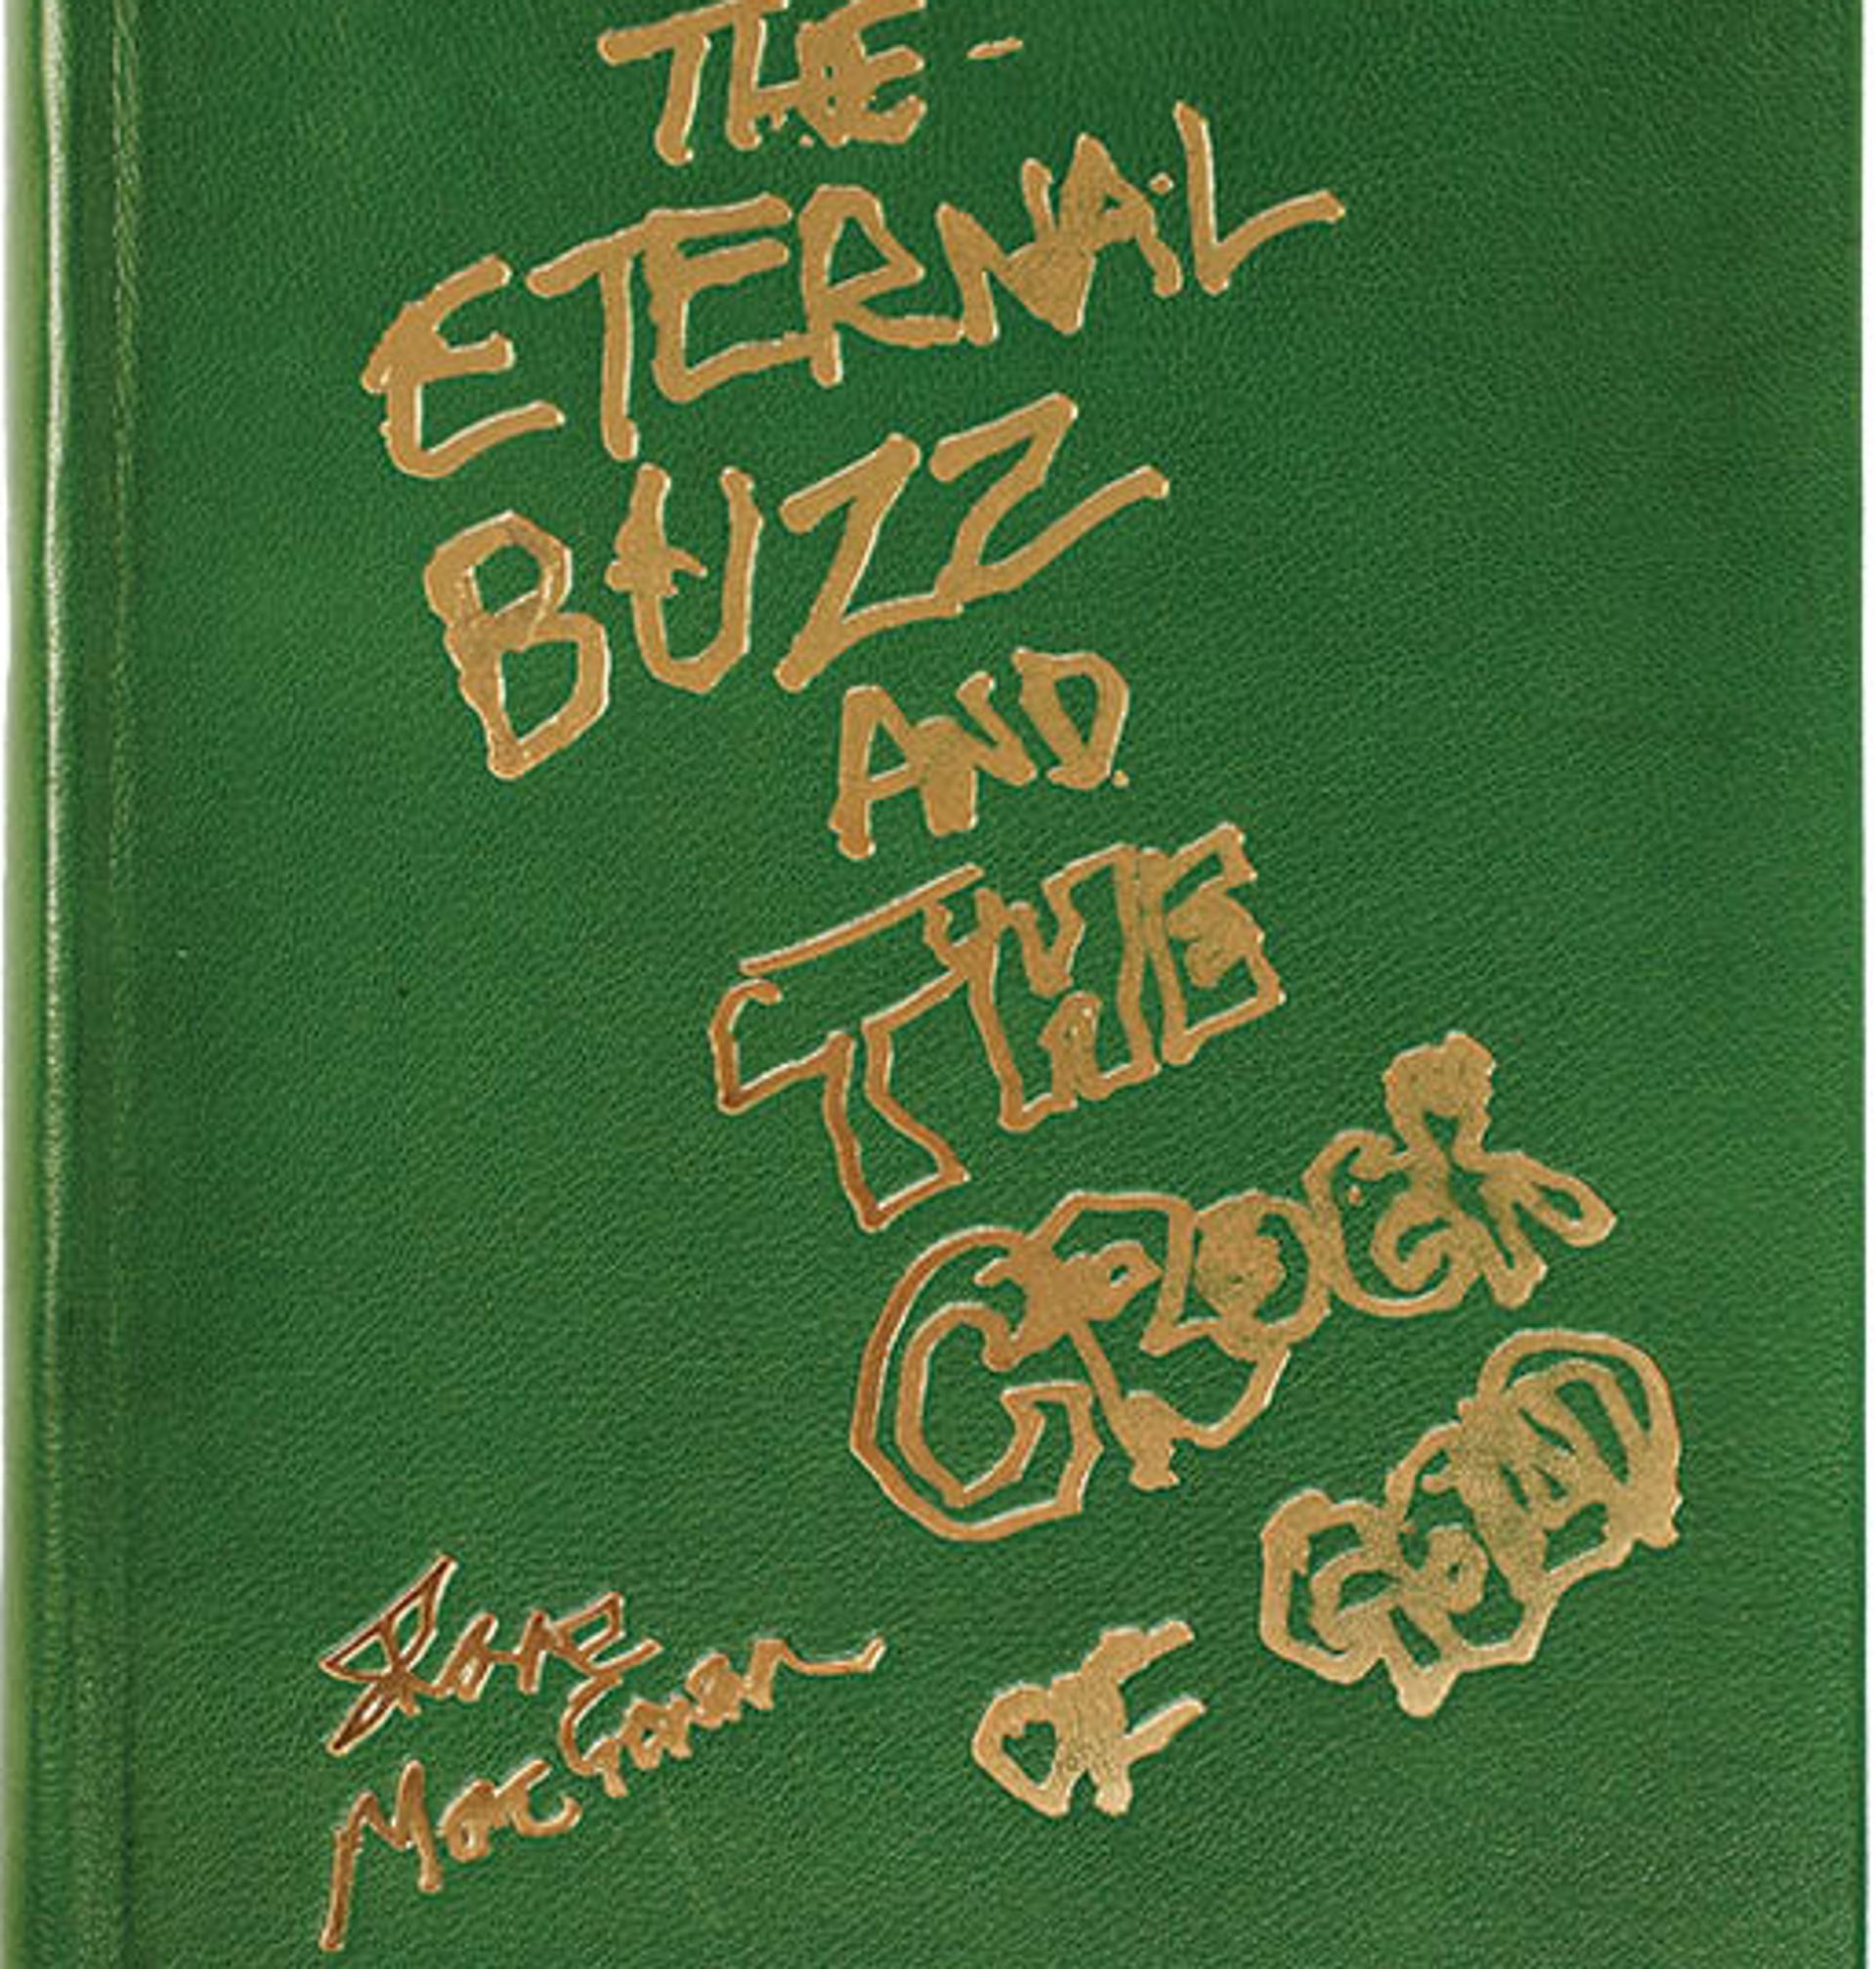 Front cover of The Eternal Buzz and the Crock of Gold by Shane MacGowan. © Shane MacGowan